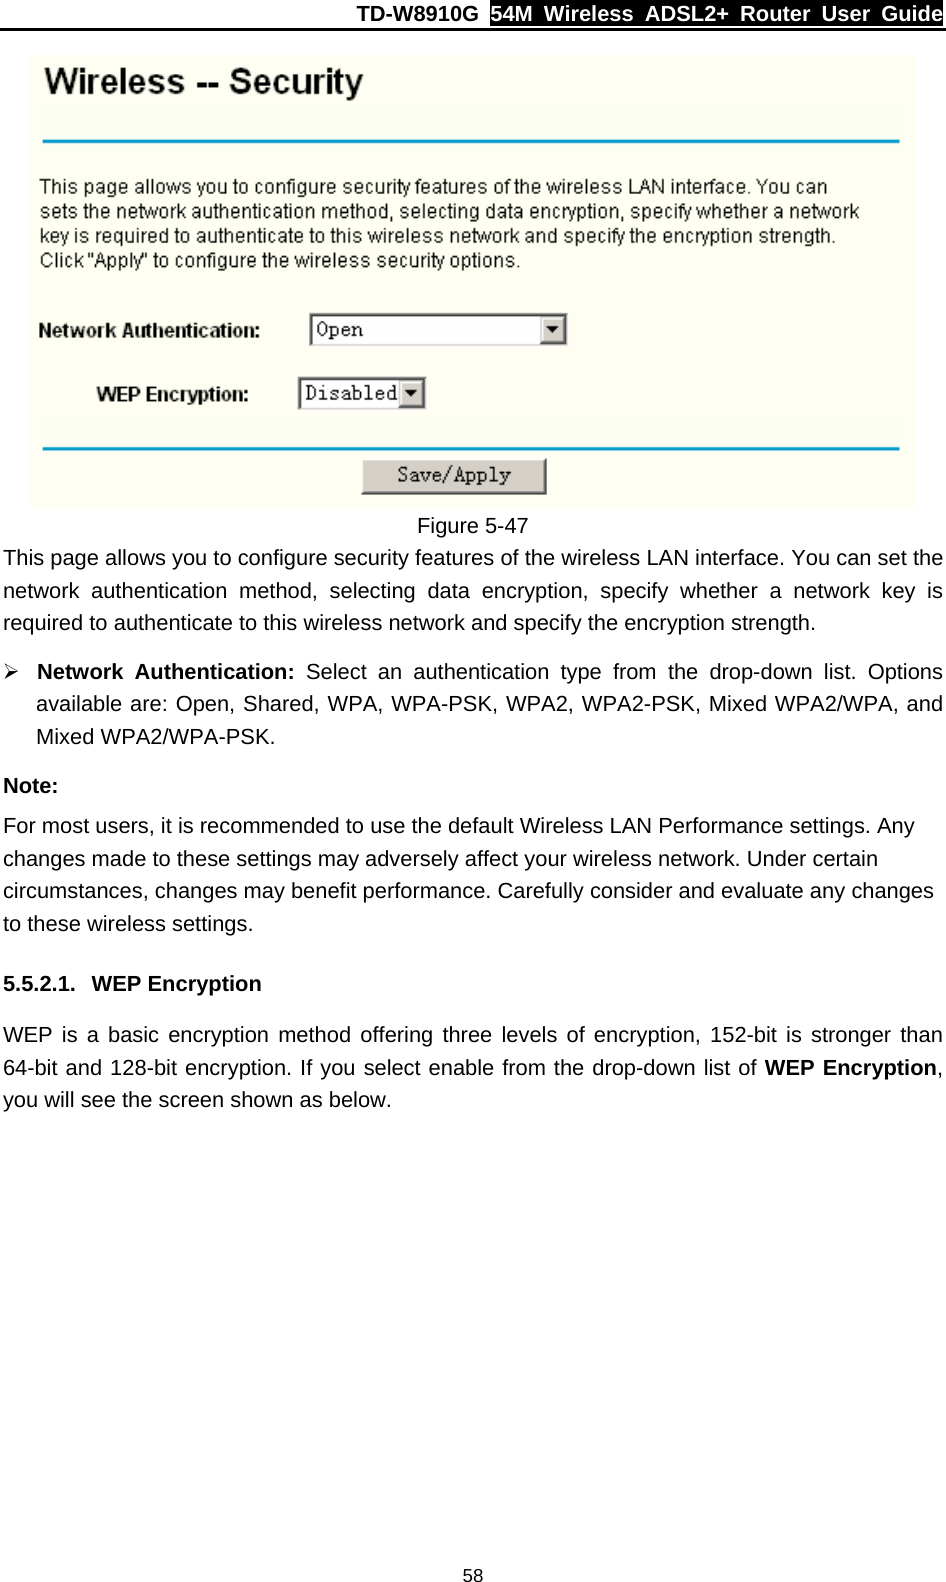 TD-W8910G  54M Wireless ADSL2+ Router User Guide  58 Figure 5-47 This page allows you to configure security features of the wireless LAN interface. You can set the network authentication method, selecting data encryption, specify whether a network key is required to authenticate to this wireless network and specify the encryption strength. ¾ Network Authentication: Select an authentication type from the drop-down list. Options available are: Open, Shared, WPA, WPA-PSK, WPA2, WPA2-PSK, Mixed WPA2/WPA, and Mixed WPA2/WPA-PSK. Note: For most users, it is recommended to use the default Wireless LAN Performance settings. Any changes made to these settings may adversely affect your wireless network. Under certain circumstances, changes may benefit performance. Carefully consider and evaluate any changes to these wireless settings. 5.5.2.1. WEP Encryption WEP is a basic encryption method offering three levels of encryption, 152-bit is stronger than 64-bit and 128-bit encryption. If you select enable from the drop-down list of WEP Encryption, you will see the screen shown as below. 